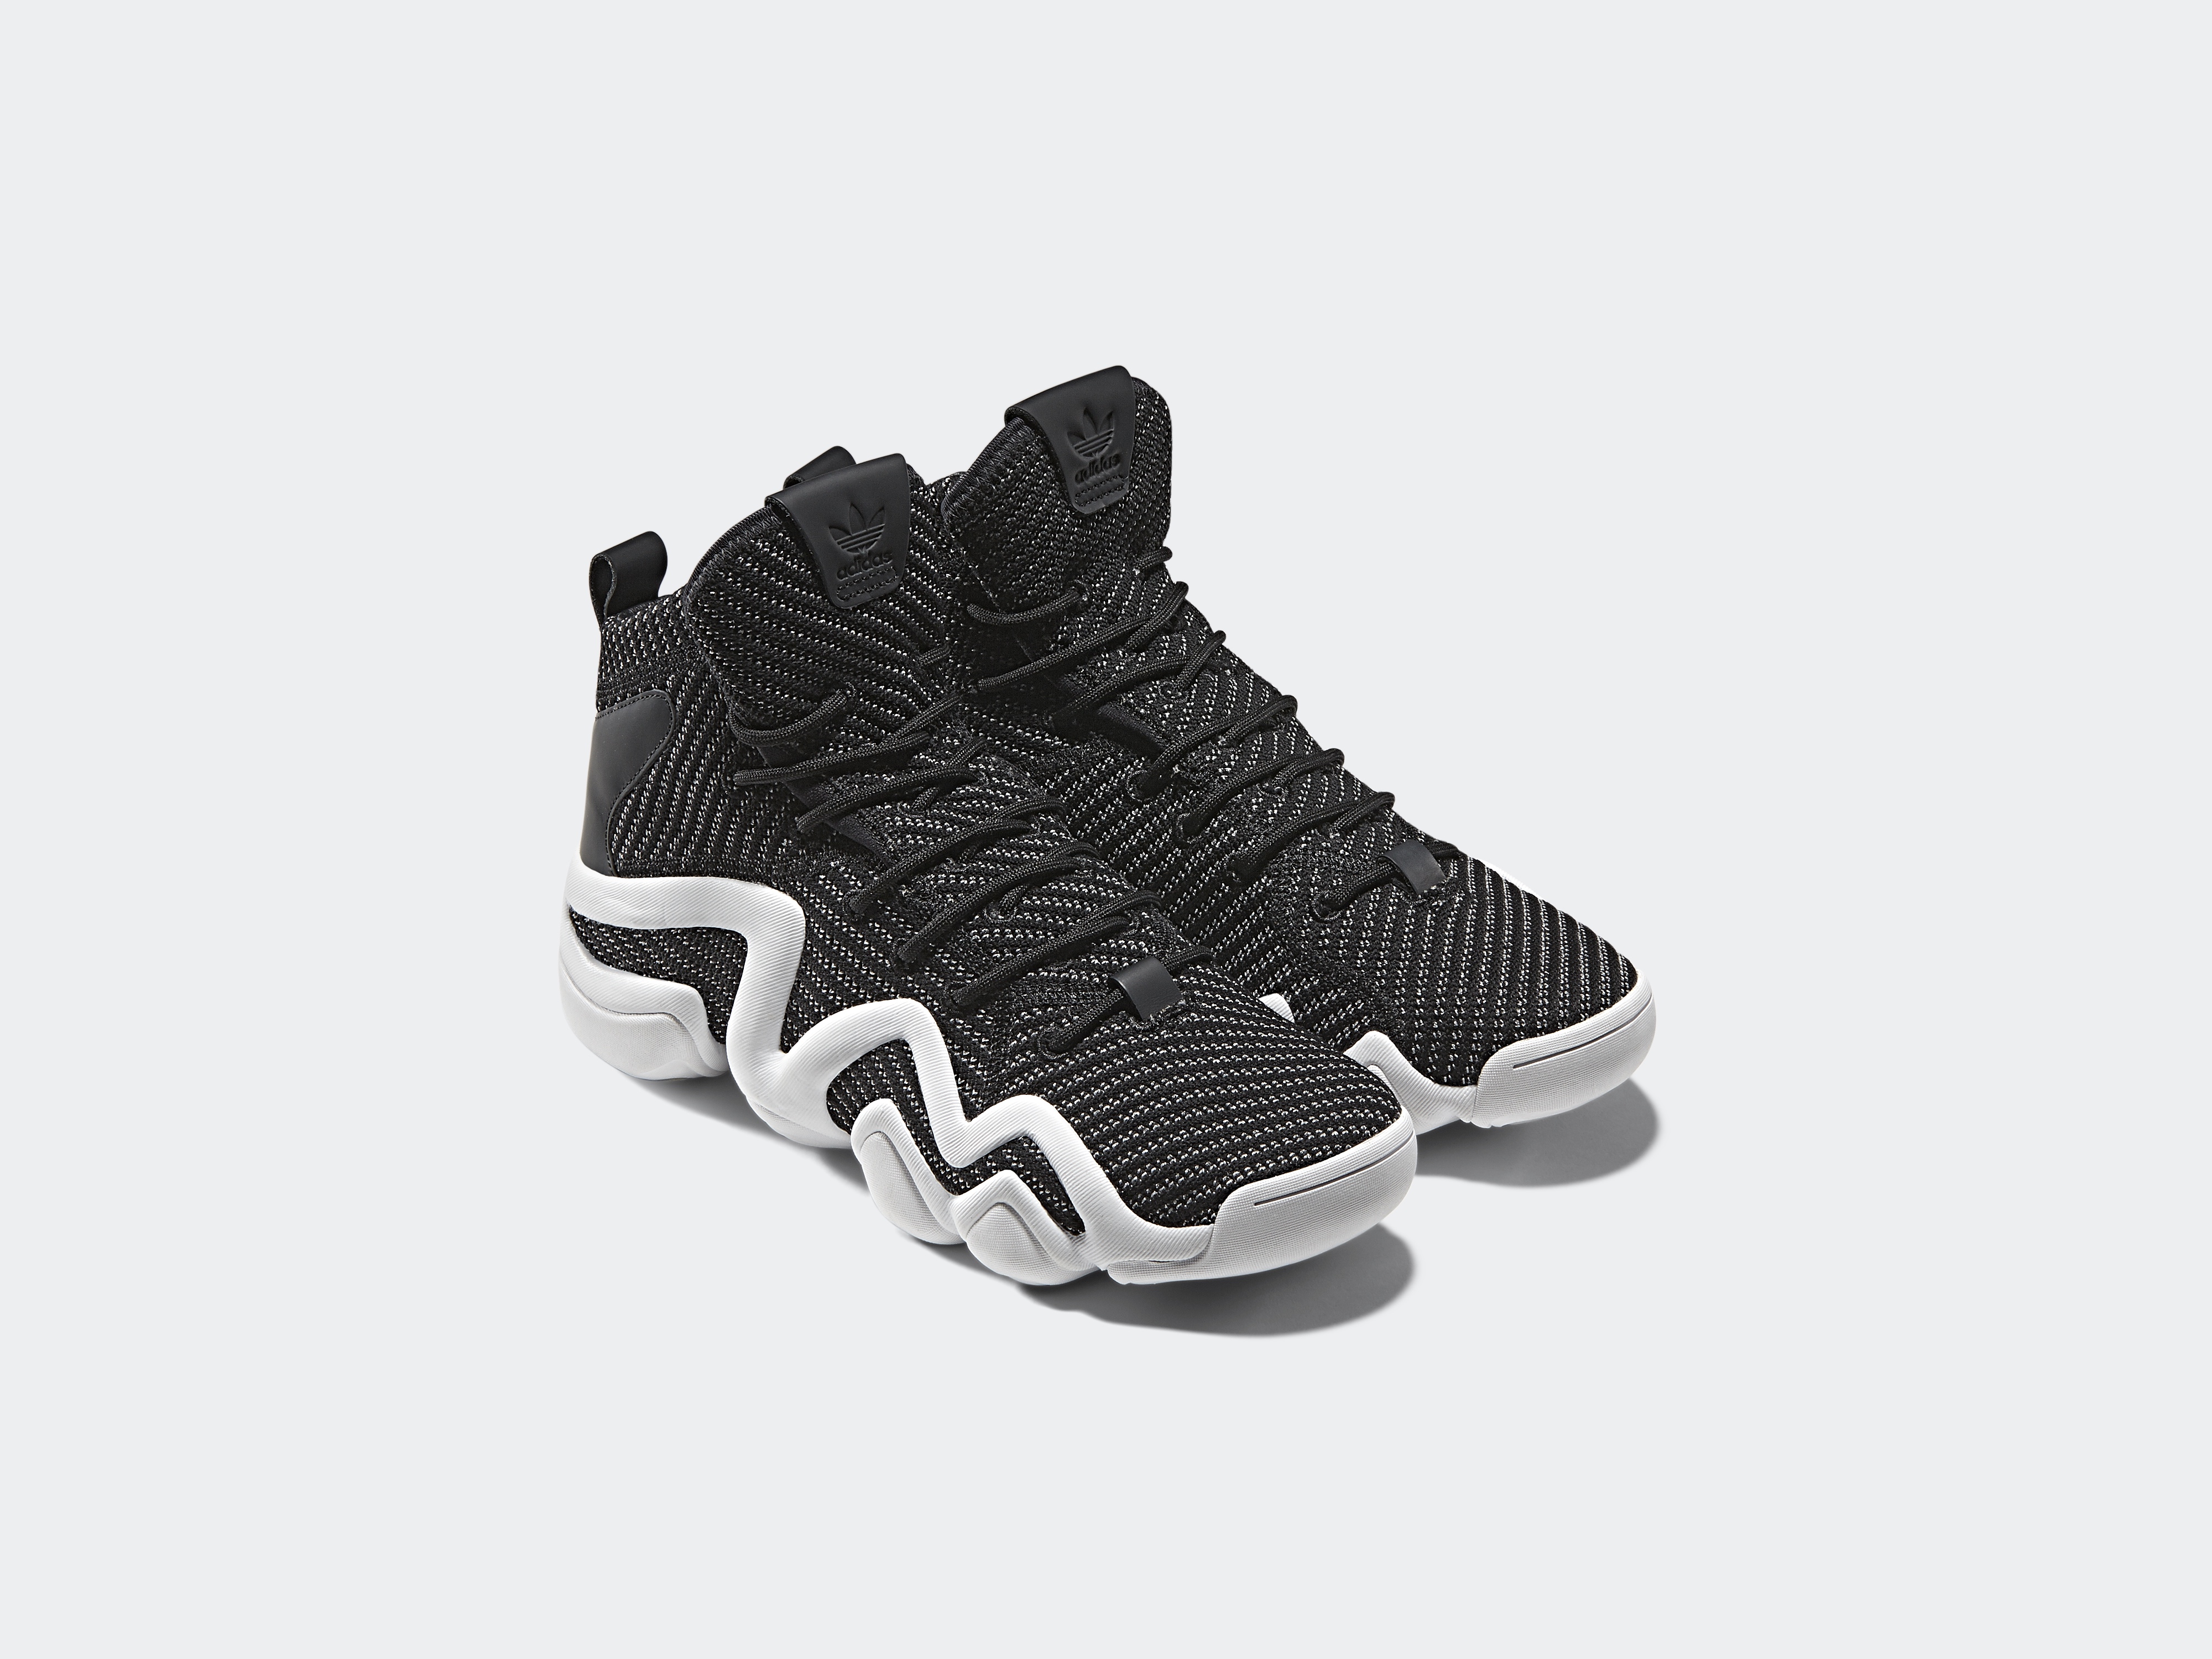 The Adidas Crazy 8 Primeknit Has A Release Date - Weartesters